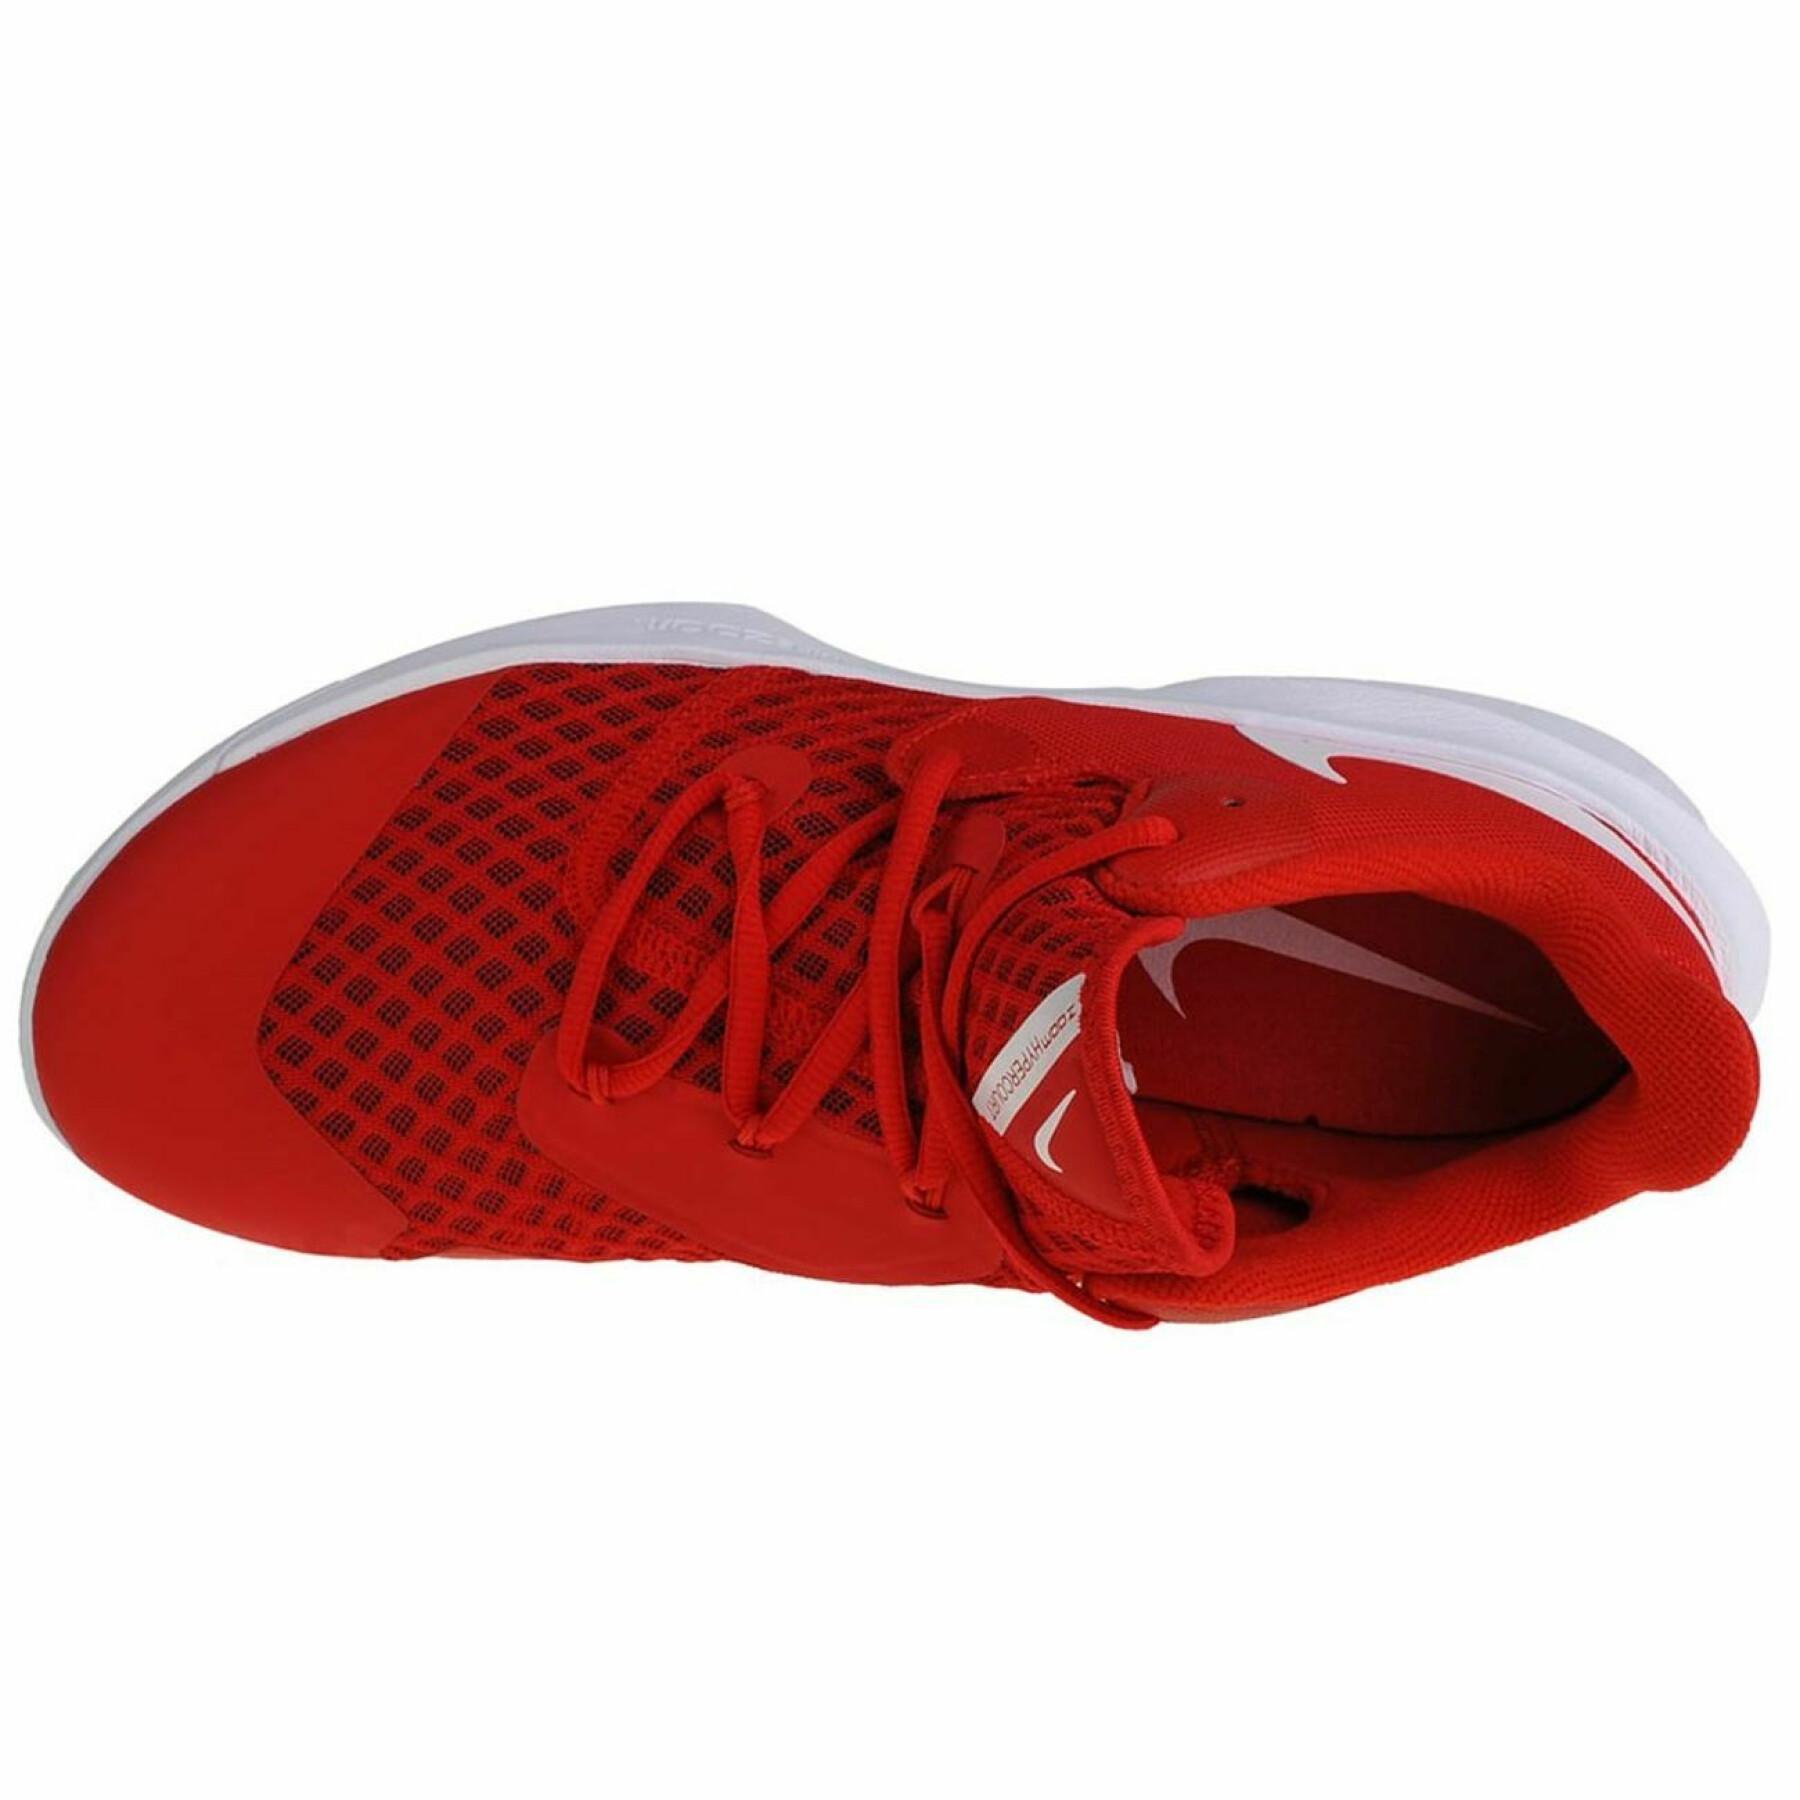 Zapatos de mujer Nike Hyperspeed Court